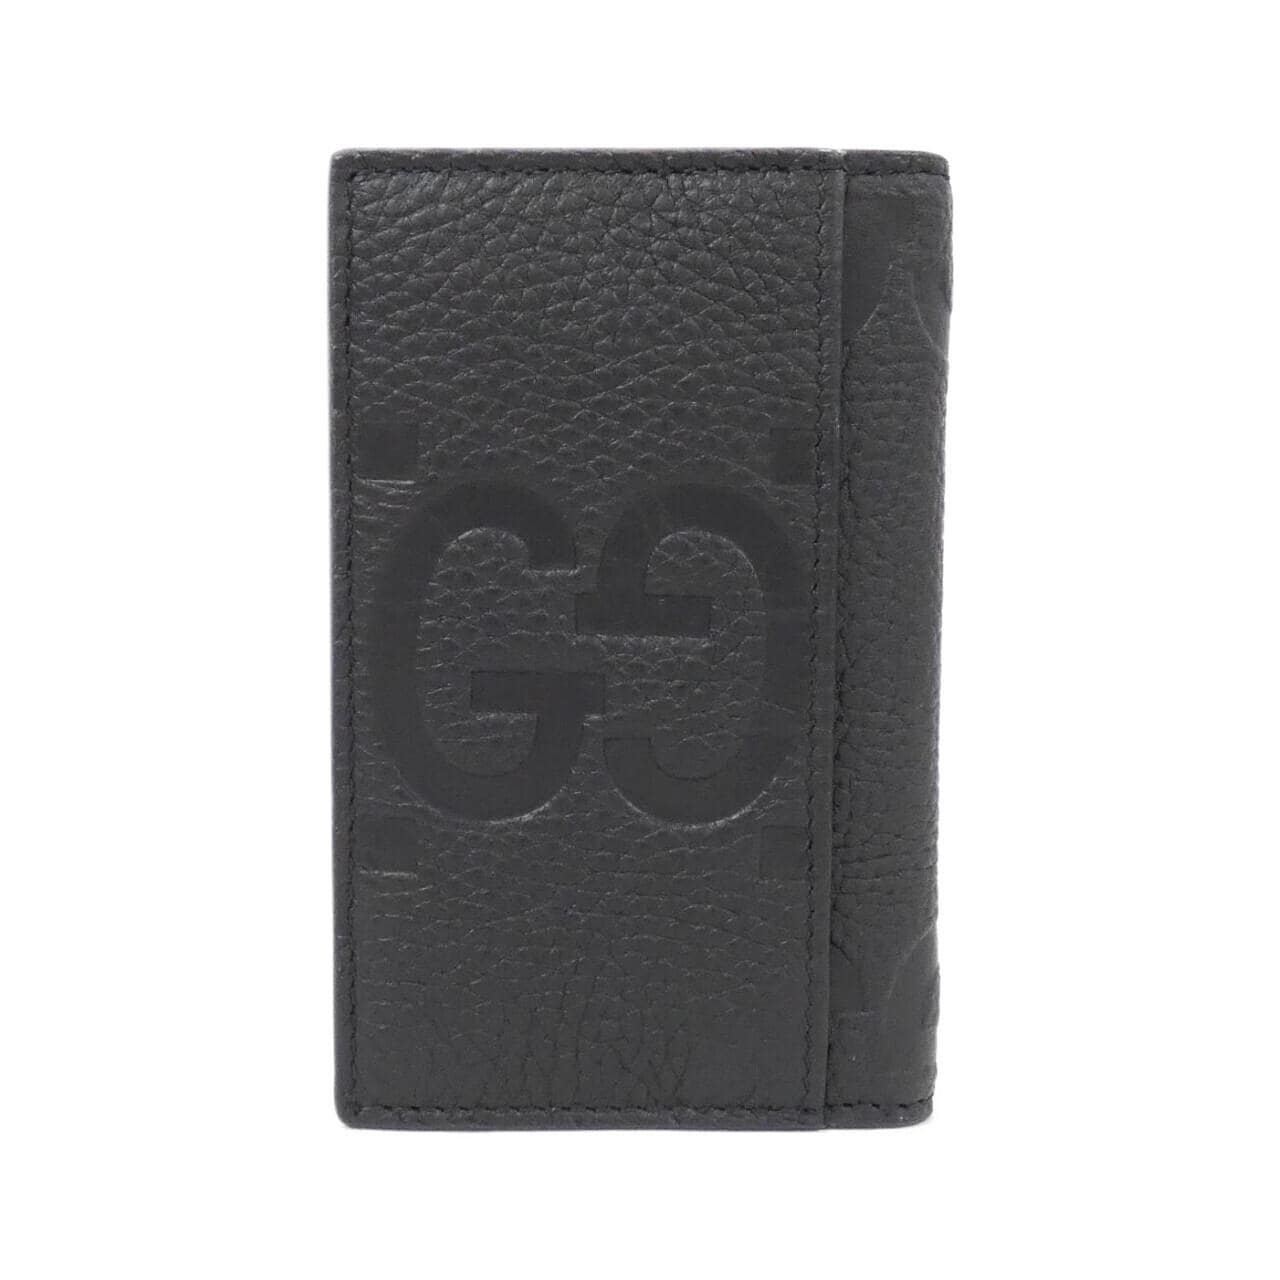 [BRAND NEW] Gucci 739478 AABY0 Card Case